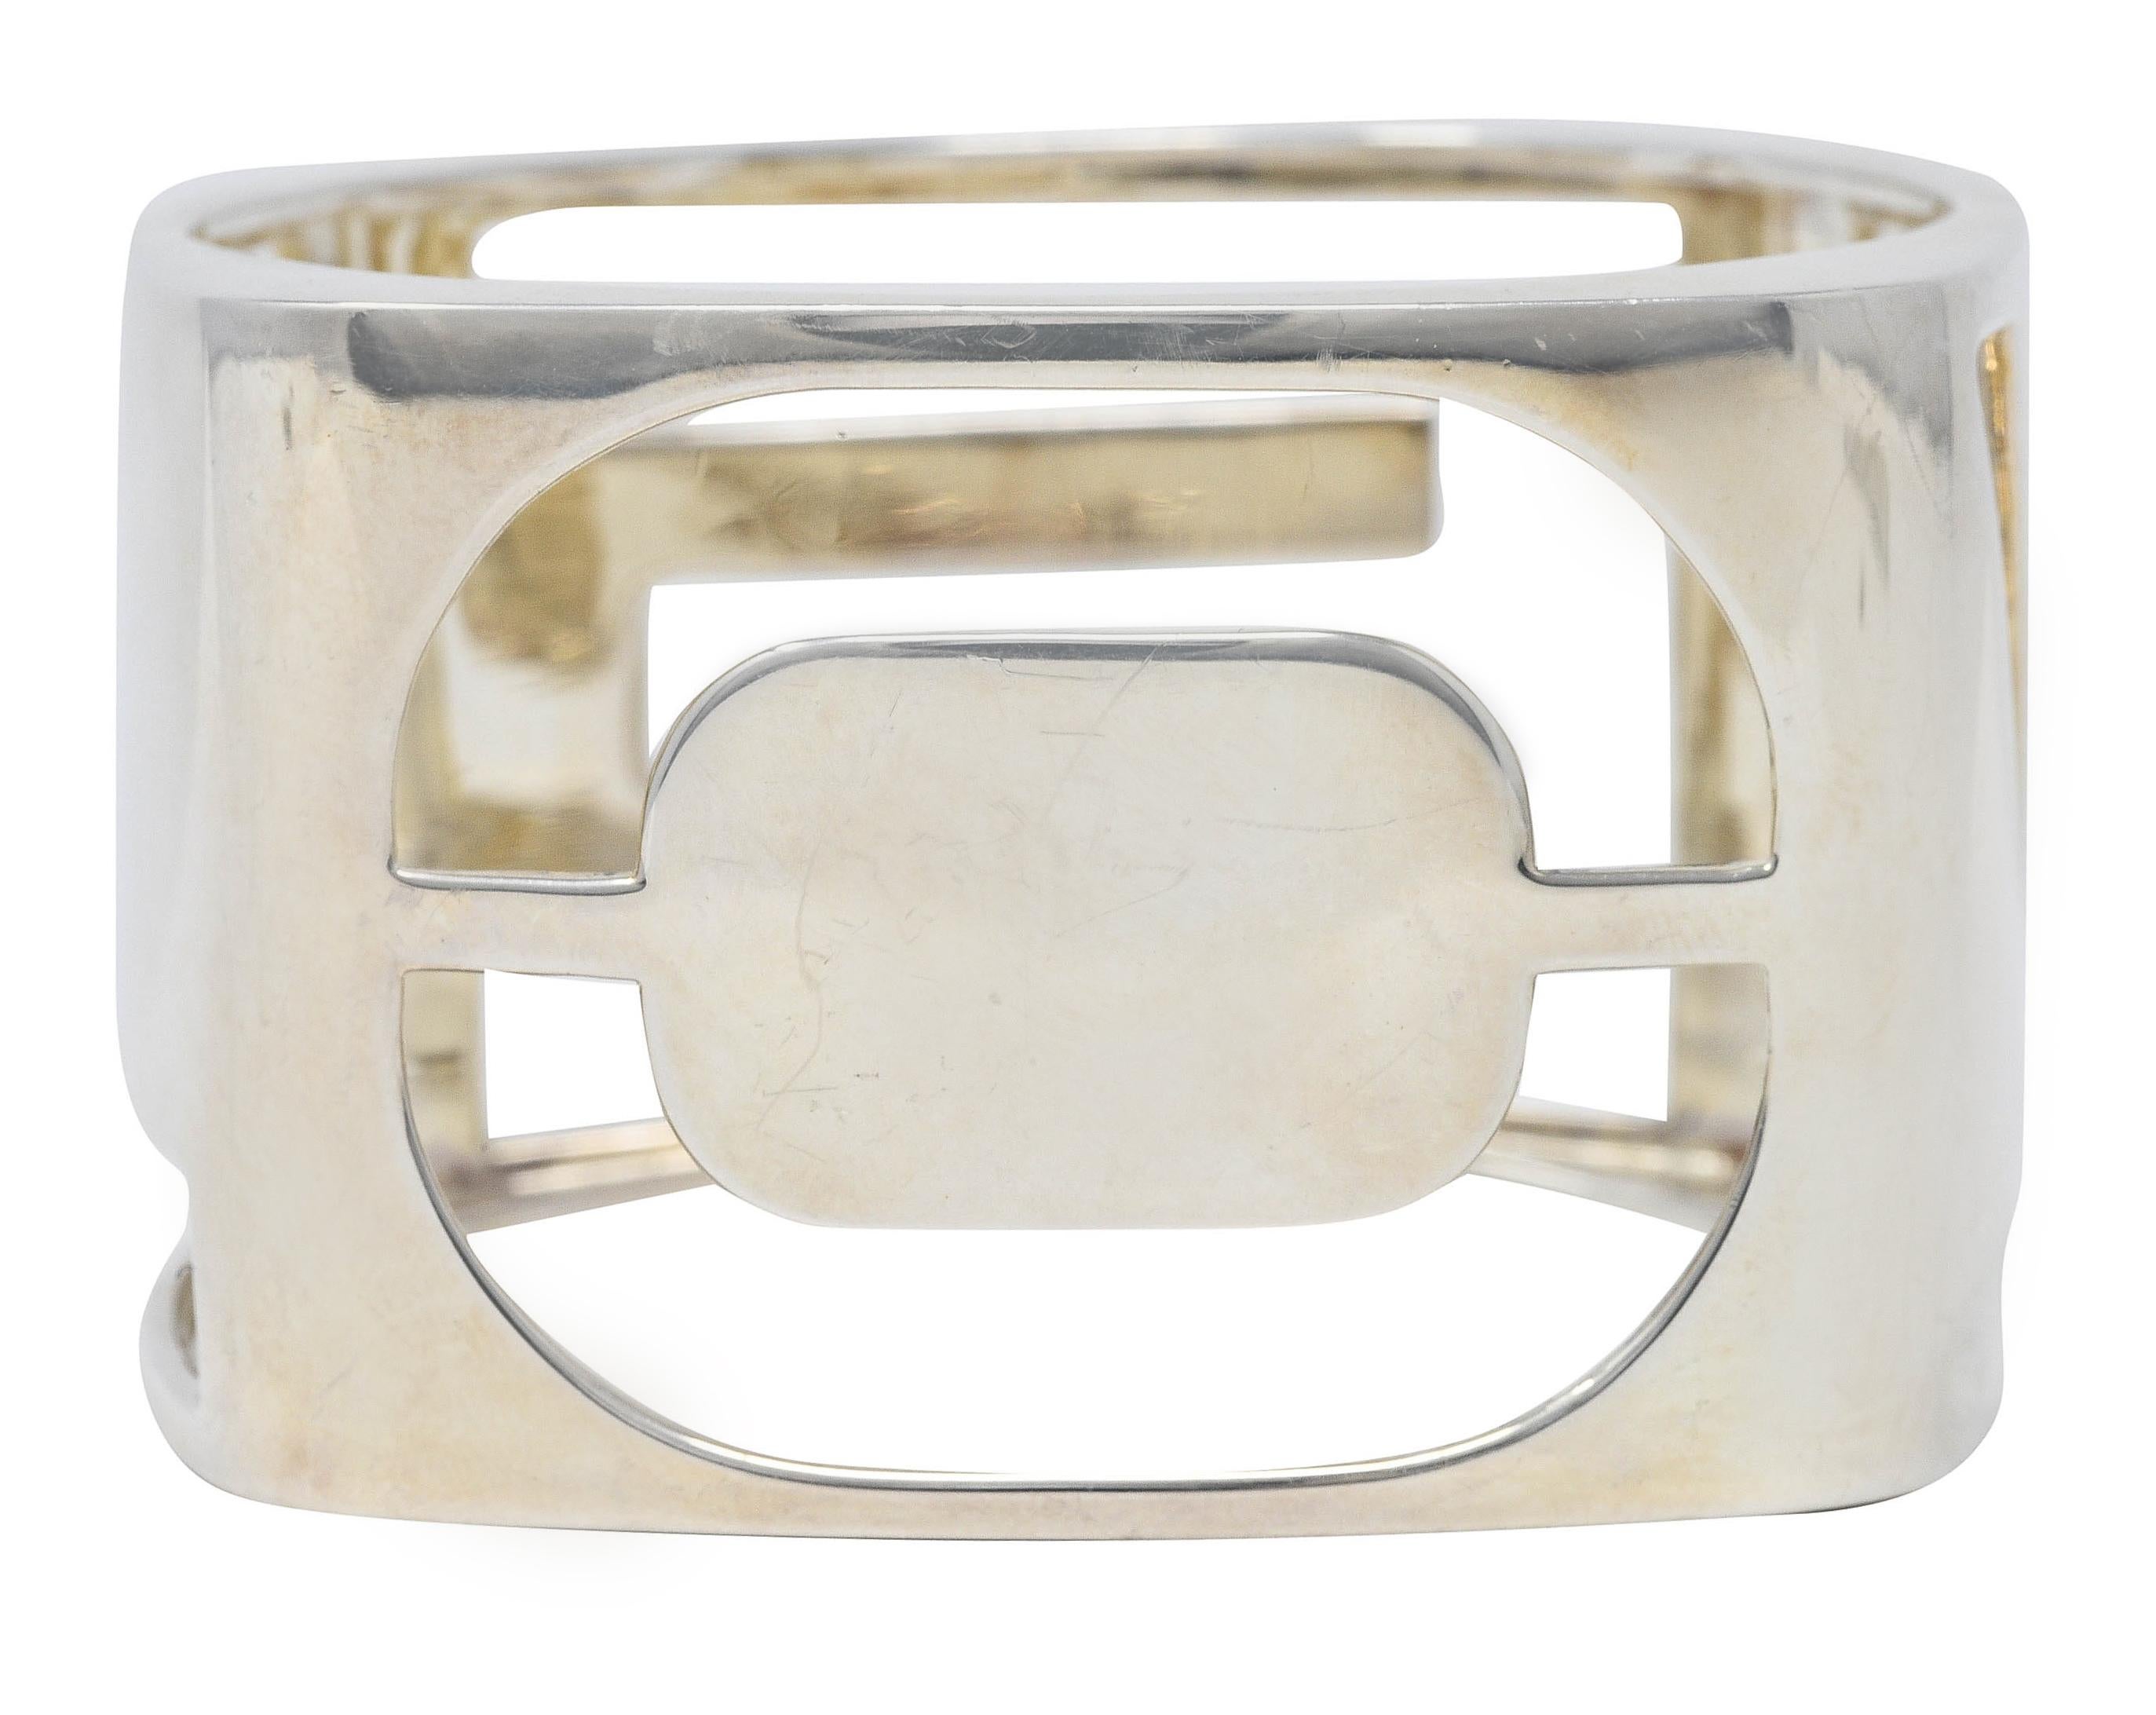 Wide rounded square form bangle bracelet featuring the word 'LOVE'

Centering a graphically pierced letter on each panel

With high polished finish

Stamped AG 925 for sterling silver

Fully signed Tiffany & Co.

From the Tiffany Love Era Collection